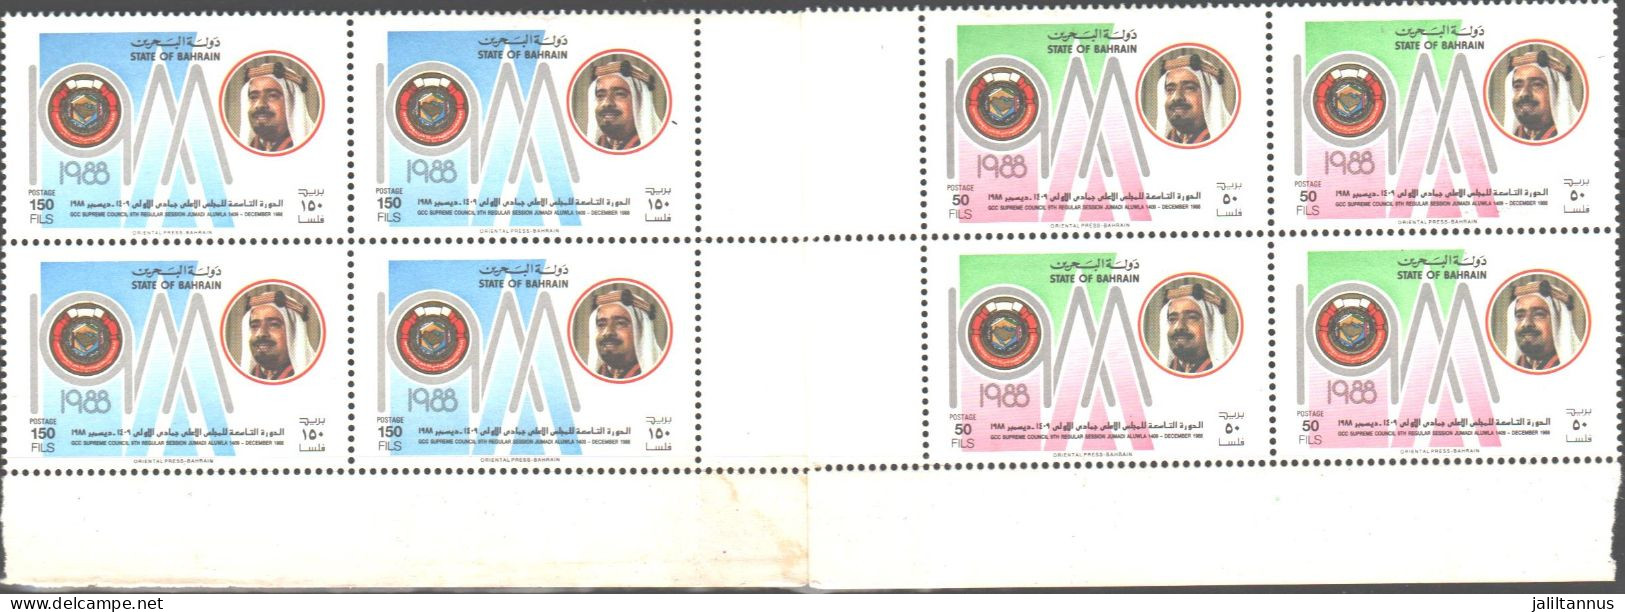 Bahrain- NINTH SUPREME COUNCIL OF GULF CO-OPERATION COUNCIL  BLOOK4  COMPLETE SET - Bahrein (1965-...)